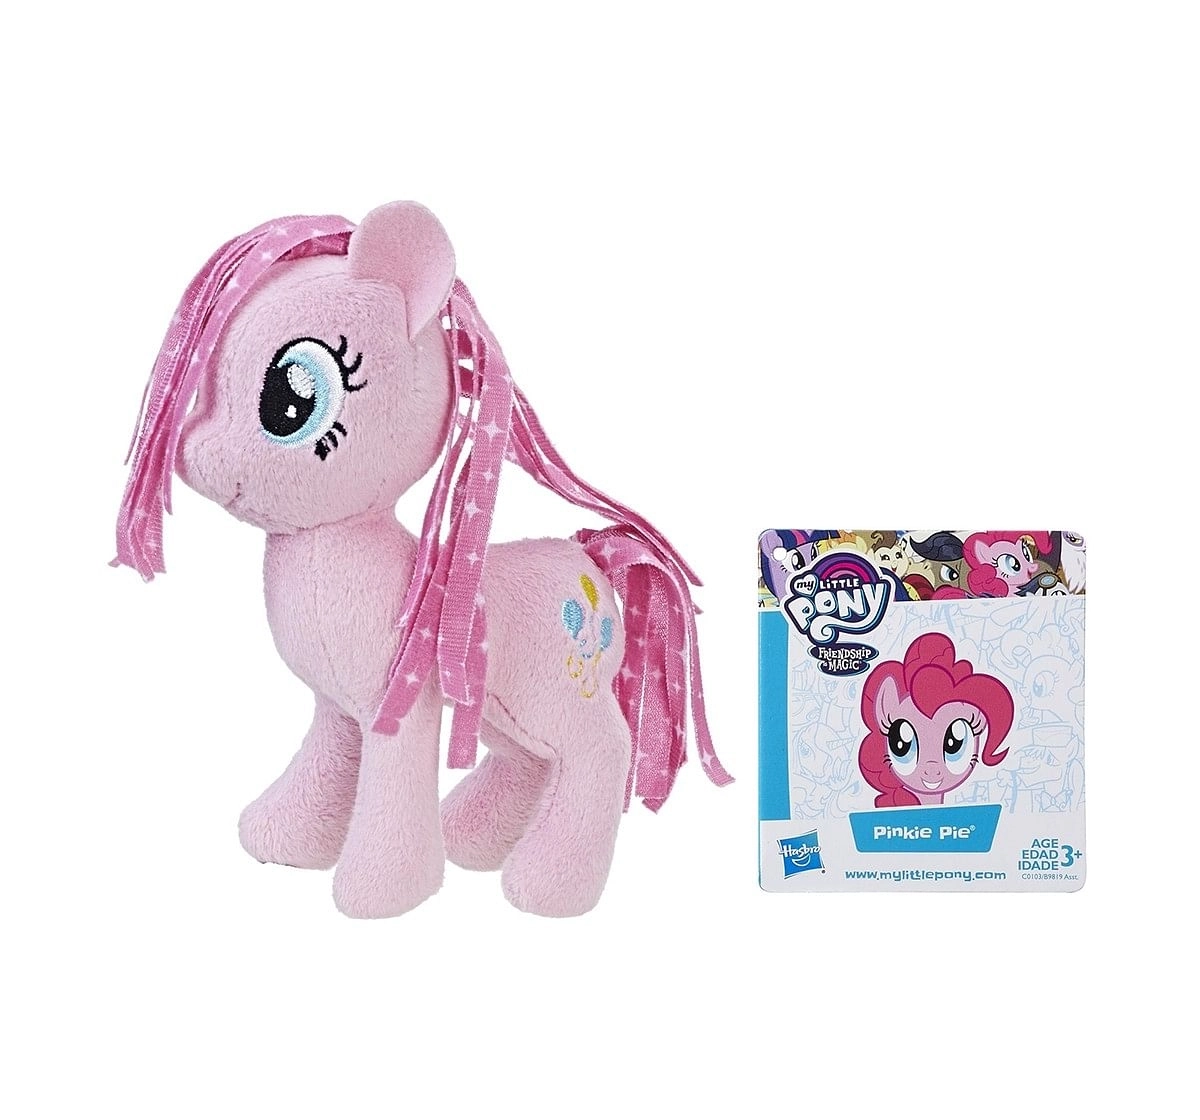  My Little Pony Small Plush Figures Assorted Character Soft Toys for Kids age 3Y+ - 14 Cm 